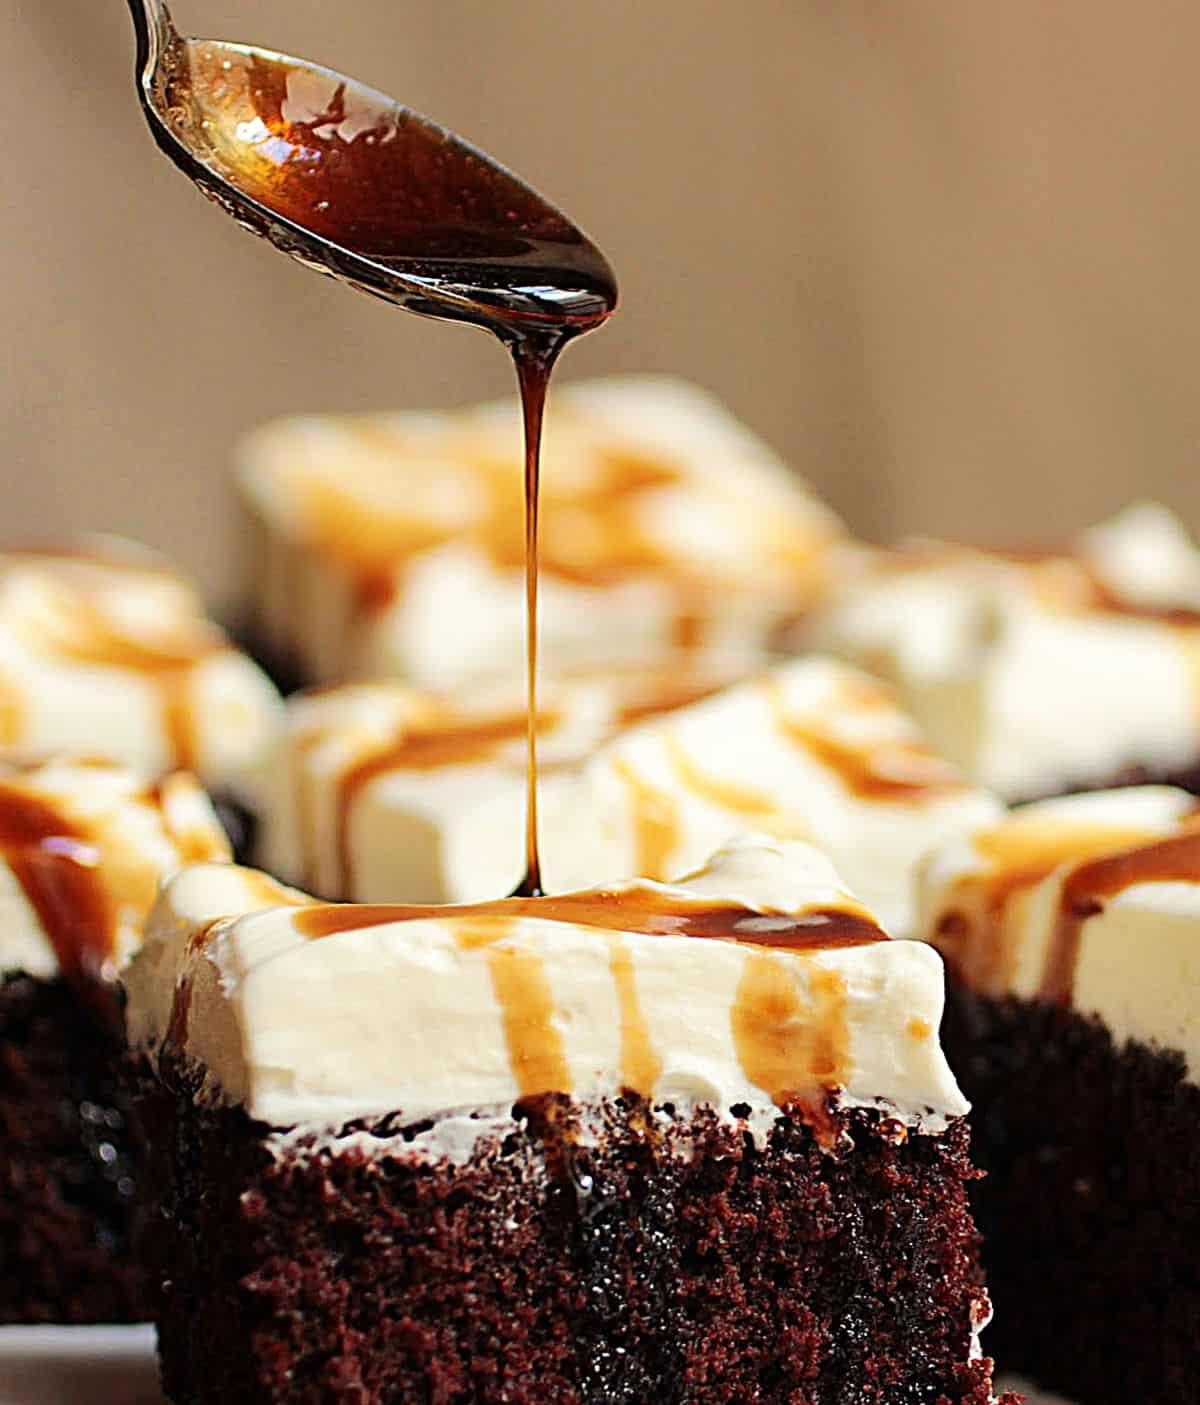 Spoon dripping stout syrup over cream topped chocolate cake